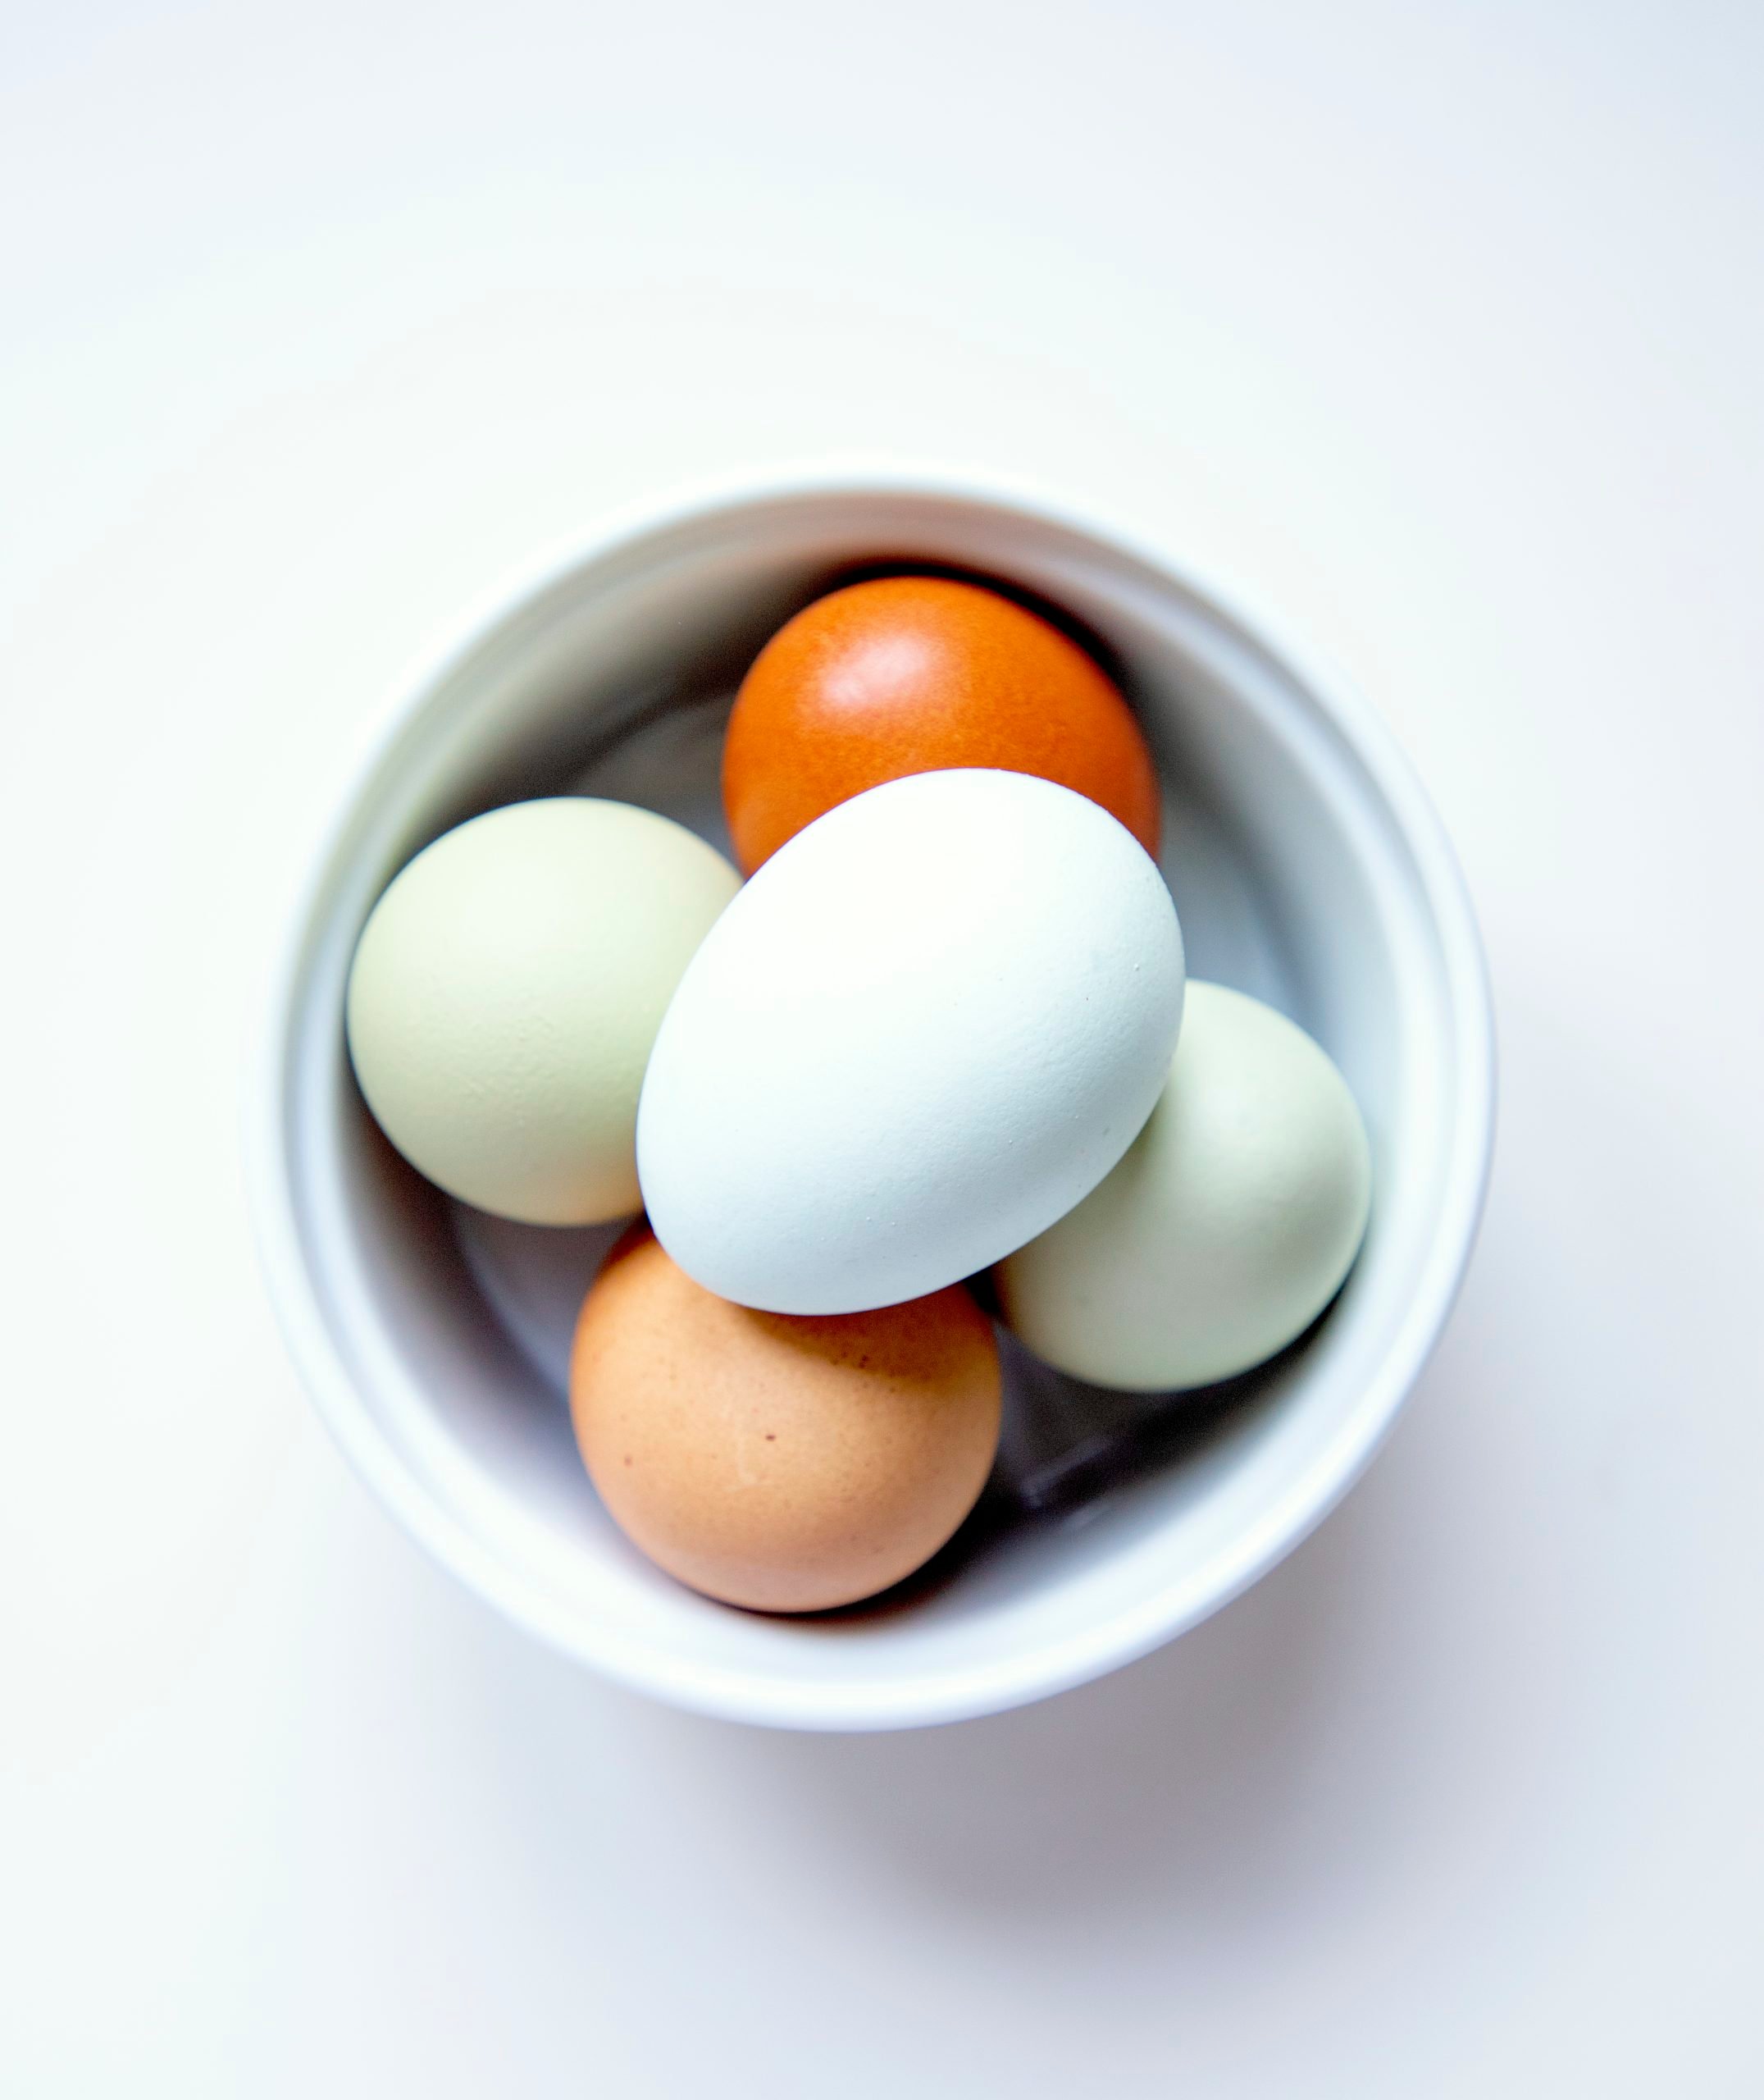 A white bowl with 5 whole eggs in it, the shells are all different colors - brown, light brown, white, and two shades of green